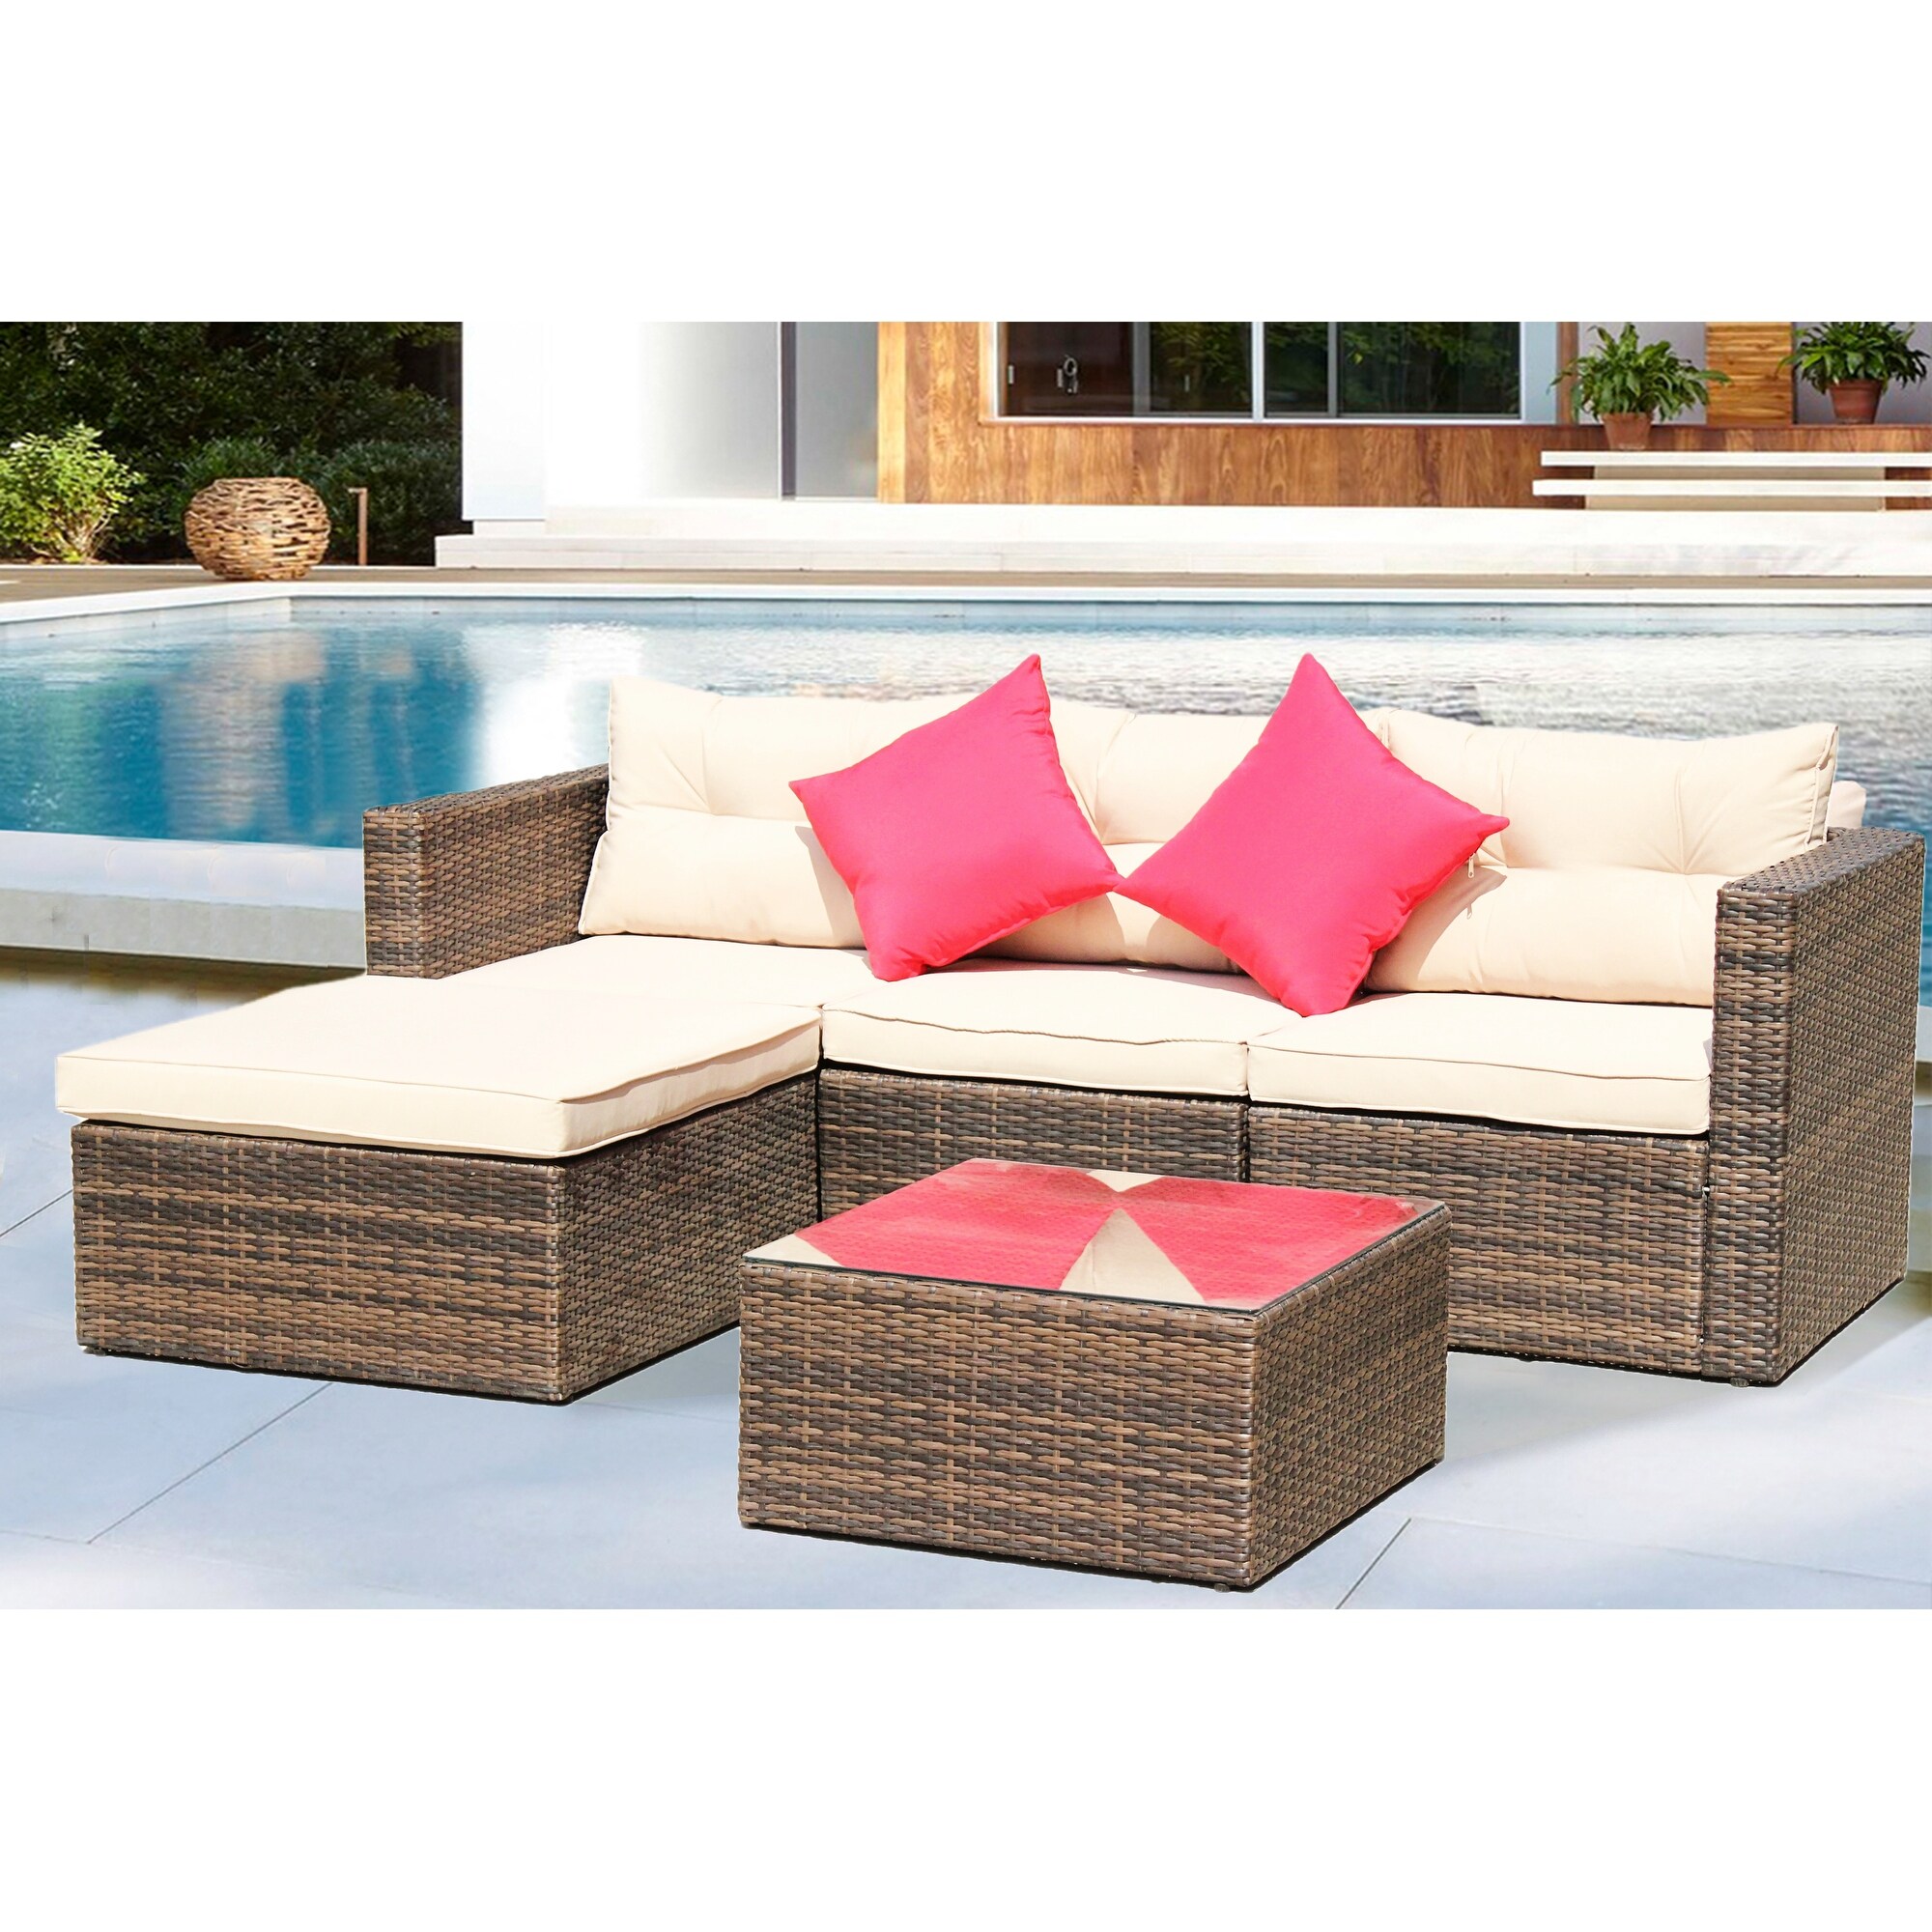 Comfortable 5-piece Wicker Sofa Set With Glass Table and Ottomans